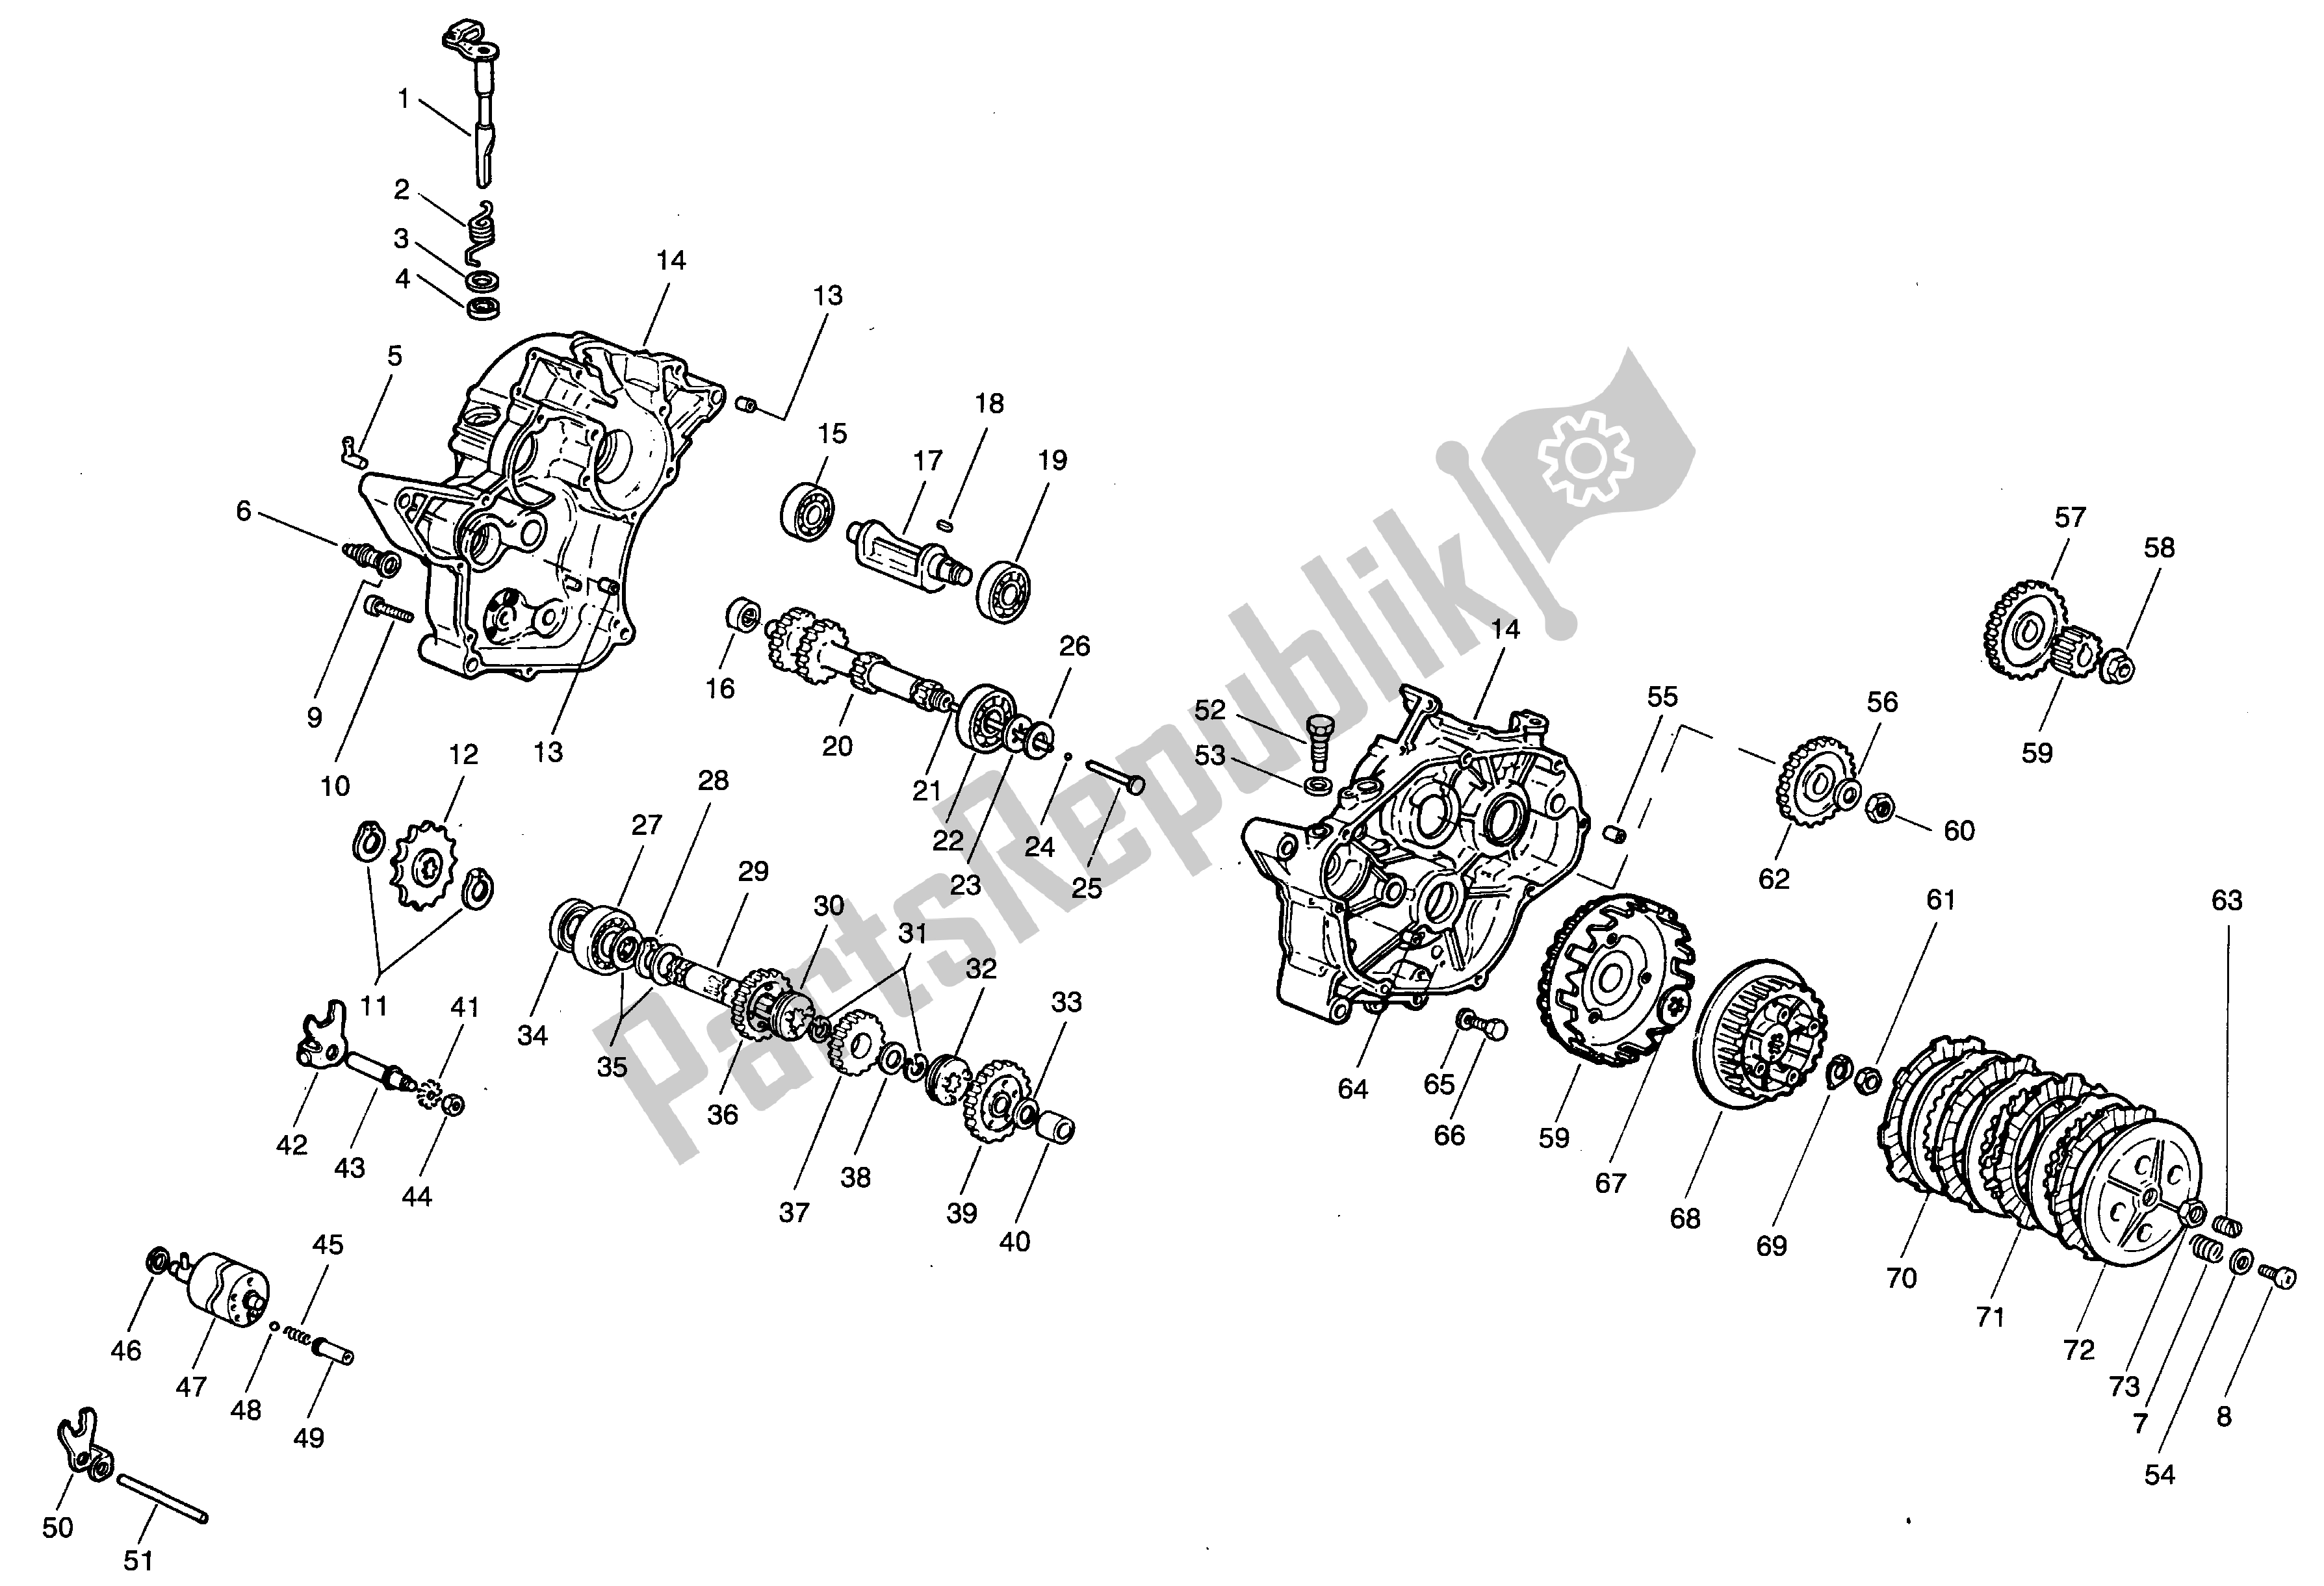 All parts for the Crankcase - Clutch - Trasmission of the Aprilia AF1 50 1991